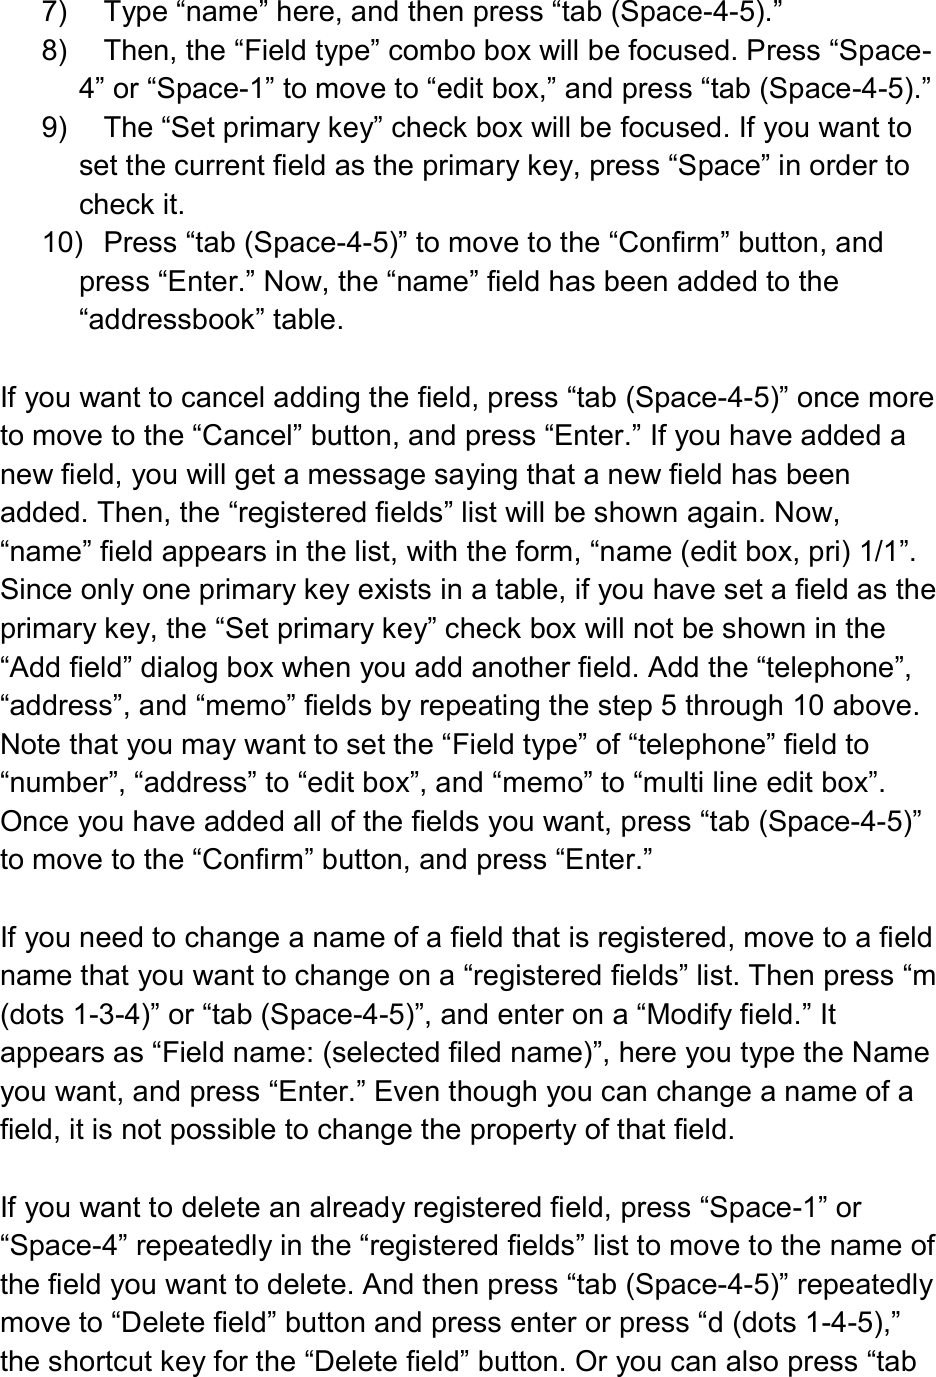  7)  Type “name” here, and then press “tab (Space-4-5).” 8)  Then, the “Field type” combo box will be focused. Press “Space-4” or “Space-1” to move to “edit box,” and press “tab (Space-4-5).” 9)  The “Set primary key” check box will be focused. If you want to set the current field as the primary key, press “Space” in order to check it. 10)  Press “tab (Space-4-5)” to move to the “Confirm” button, and press “Enter.” Now, the “name” field has been added to the “addressbook” table.  If you want to cancel adding the field, press “tab (Space-4-5)” once more to move to the “Cancel” button, and press “Enter.” If you have added a new field, you will get a message saying that a new field has been added. Then, the “registered fields” list will be shown again. Now, “name” field appears in the list, with the form, “name (edit box, pri) 1/1”. Since only one primary key exists in a table, if you have set a field as the primary key, the “Set primary key” check box will not be shown in the “Add field” dialog box when you add another field. Add the “telephone”, “address”, and “memo” fields by repeating the step 5 through 10 above. Note that you may want to set the “Field type” of “telephone” field to “number”, “address” to “edit box”, and “memo” to “multi line edit box”. Once you have added all of the fields you want, press “tab (Space-4-5)” to move to the “Confirm” button, and press “Enter.”  If you need to change a name of a field that is registered, move to a field name that you want to change on a “registered fields” list. Then press “m (dots 1-3-4)” or “tab (Space-4-5)”, and enter on a “Modify field.” It appears as “Field name: (selected filed name)”, here you type the Name you want, and press “Enter.” Even though you can change a name of a field, it is not possible to change the property of that field.  If you want to delete an already registered field, press “Space-1” or “Space-4” repeatedly in the “registered fields” list to move to the name of the field you want to delete. And then press “tab (Space-4-5)” repeatedly move to “Delete field” button and press enter or press “d (dots 1-4-5),” the shortcut key for the “Delete field” button. Or you can also press “tab 